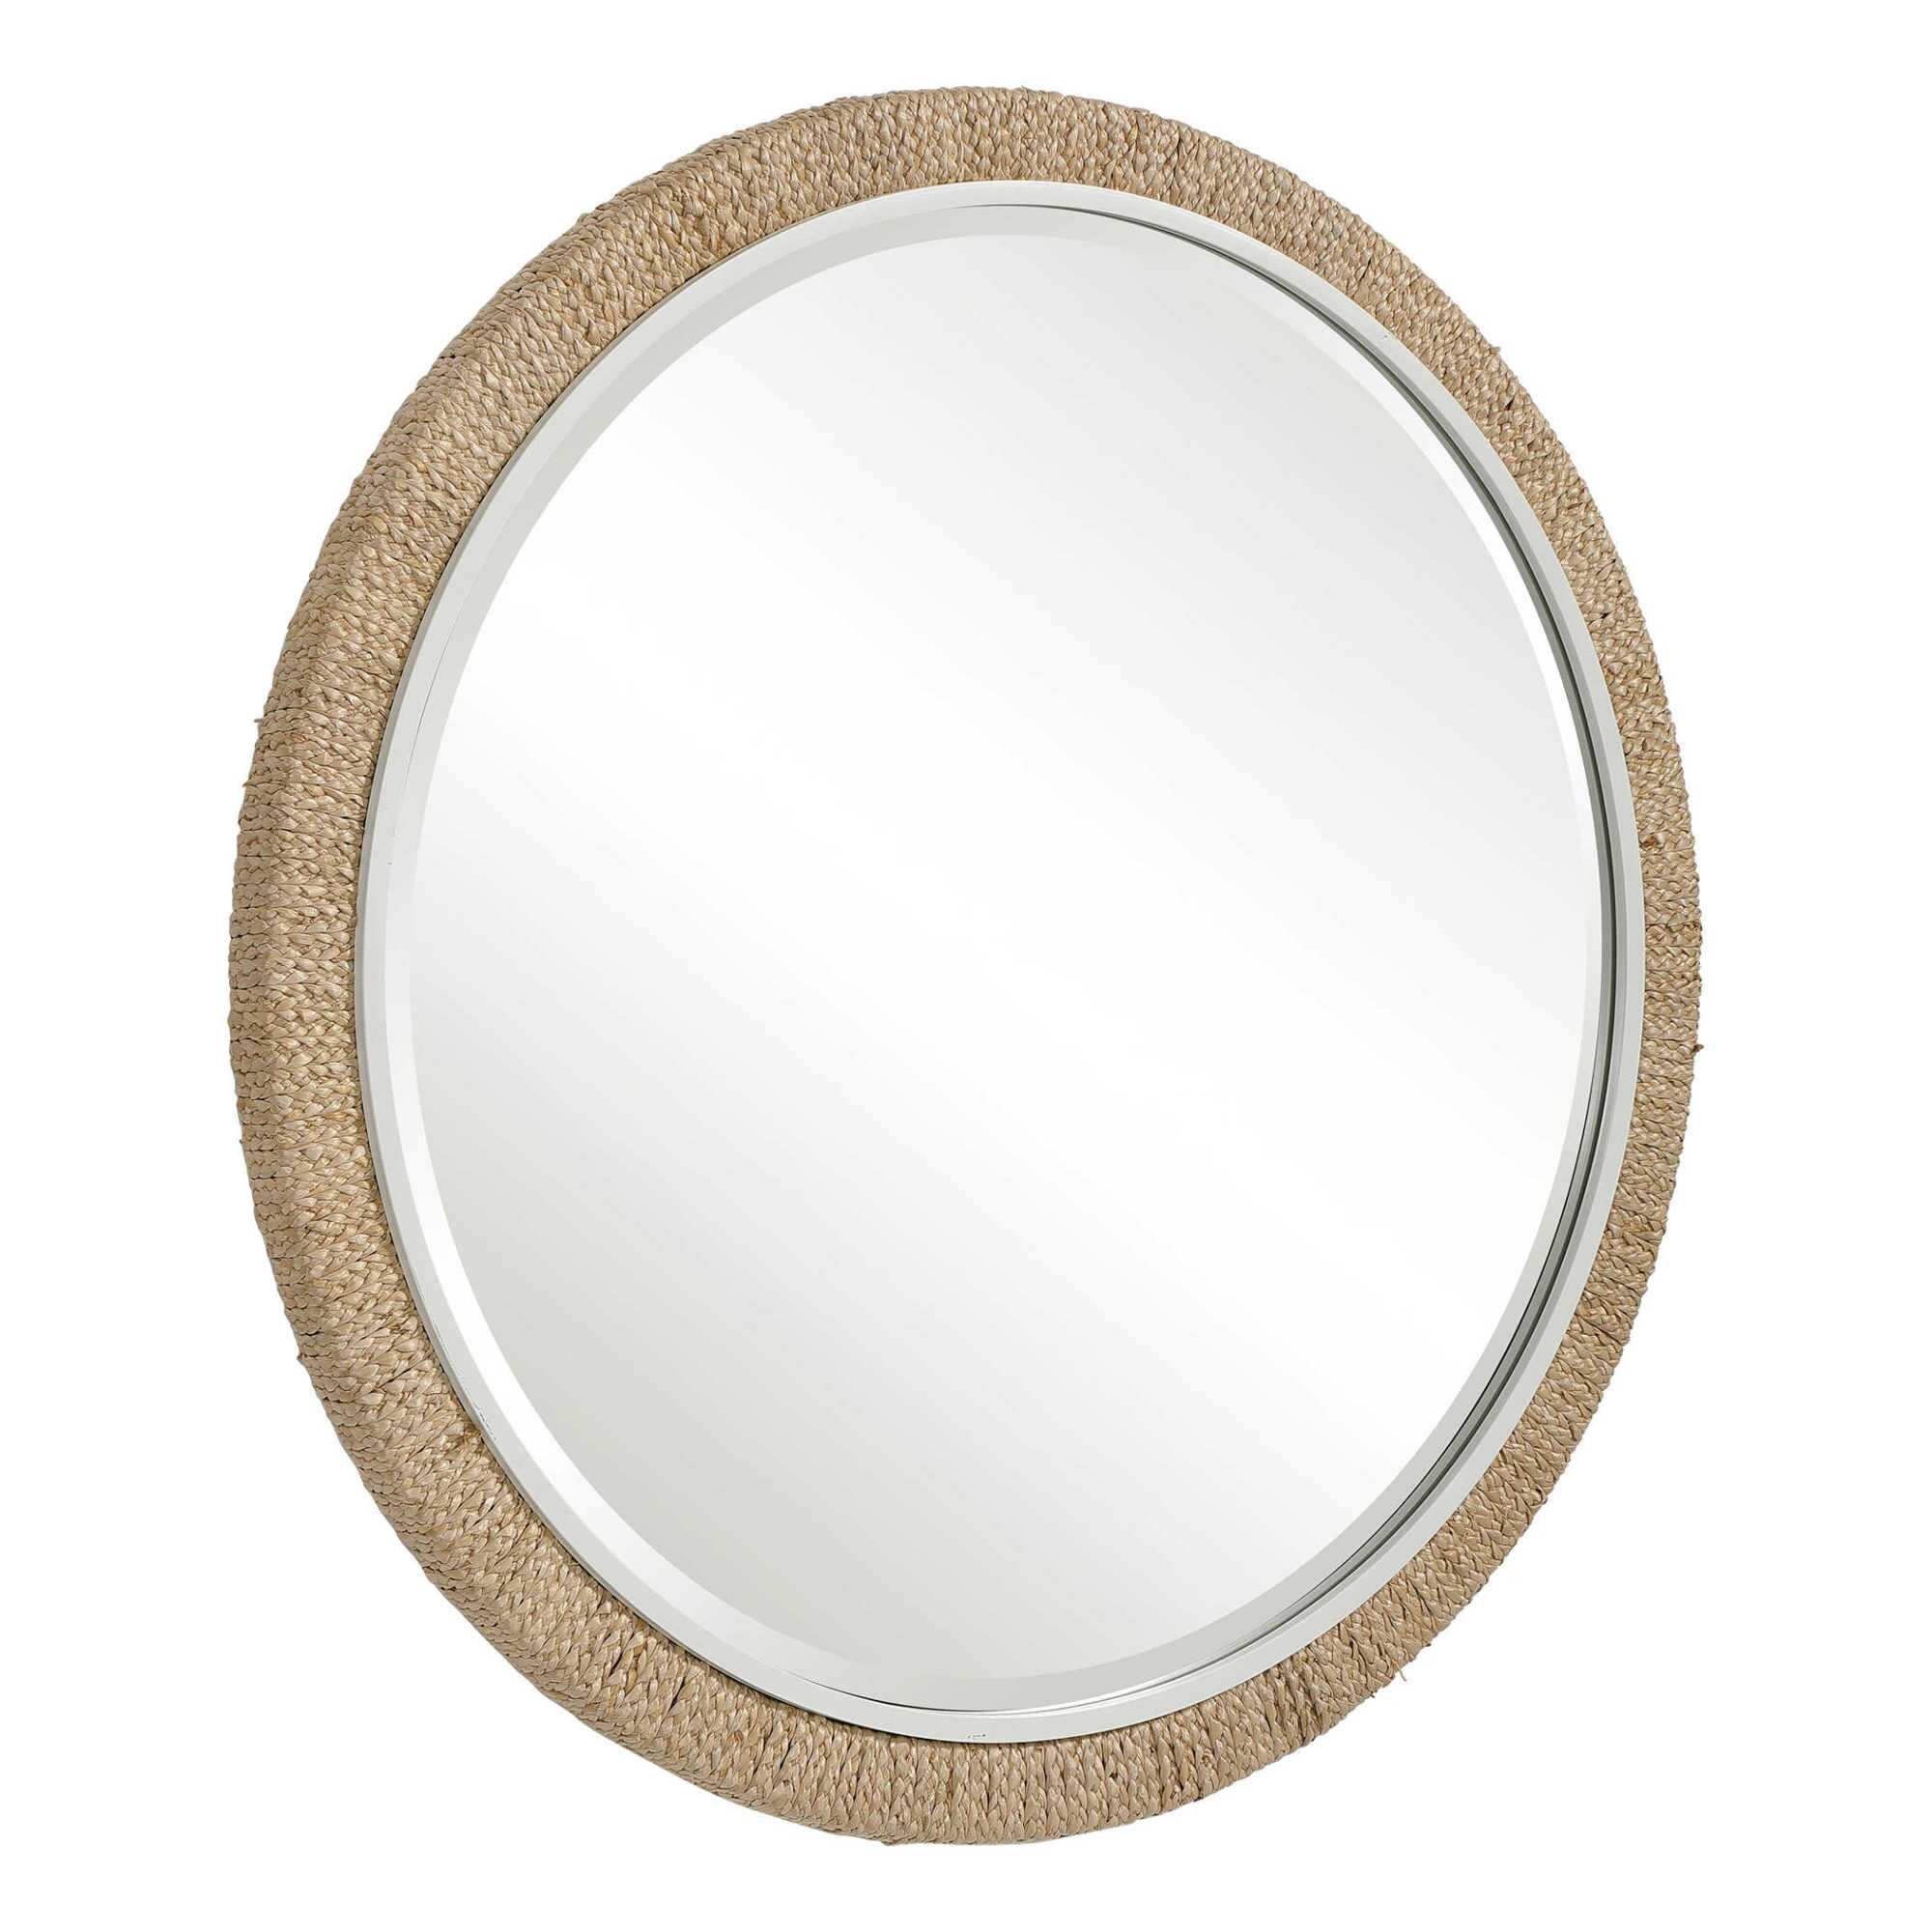 Uttermost Carbet 40" Round Modern Tropical Beach Large Wall Mirror - Natural / White